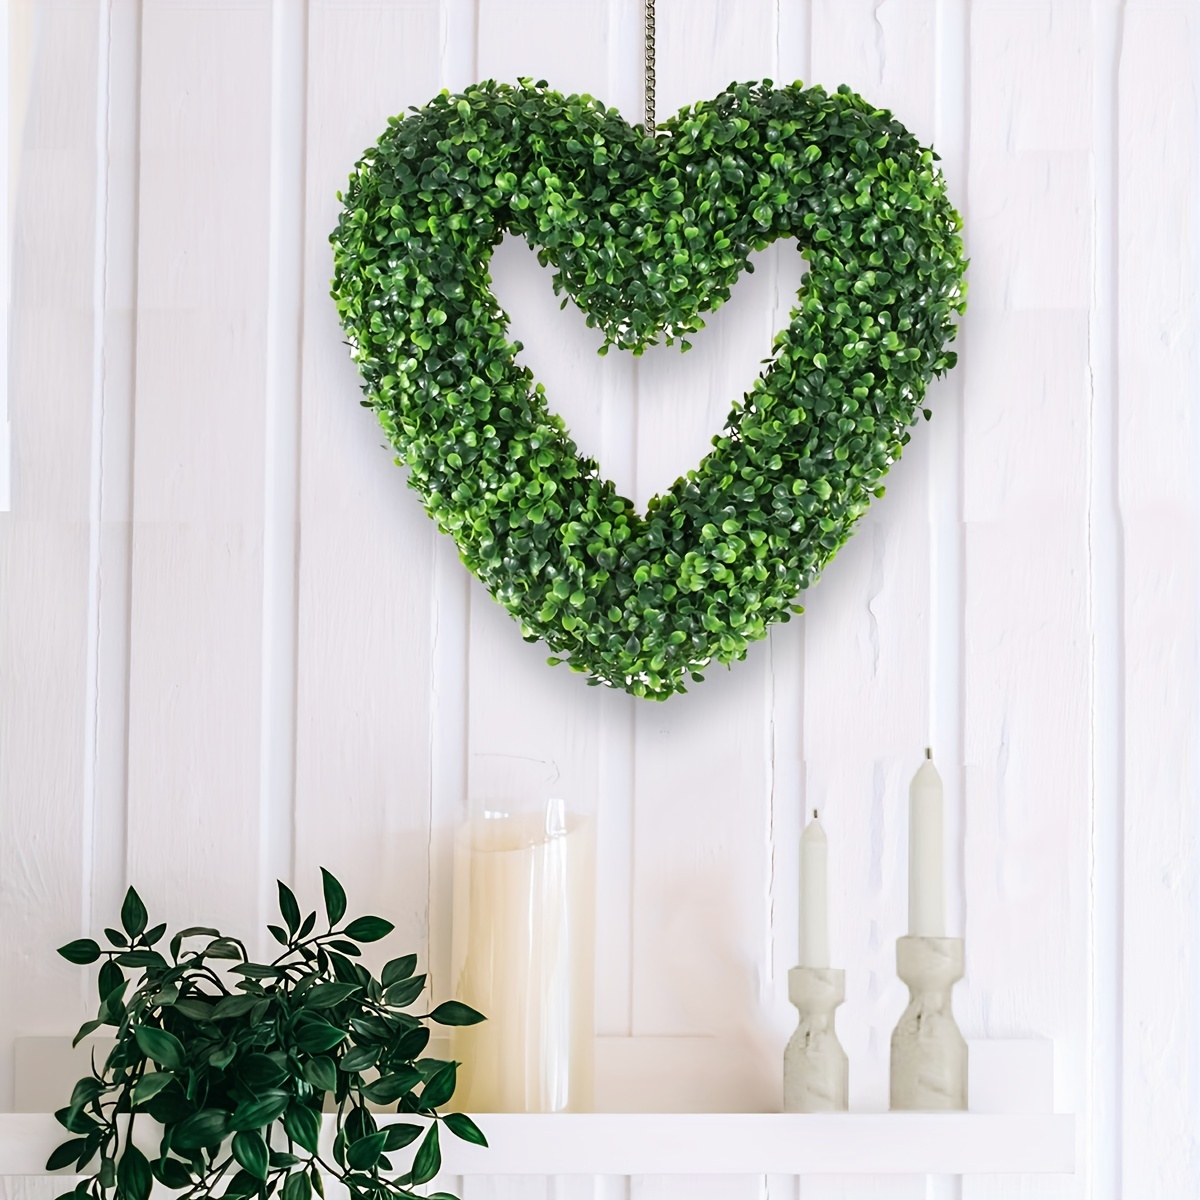 Rattan Hearts Wall Hanging Decoration, Heart Shape Wicker Wreath Ornament  for Wedding Party, Home Bedroom Decor